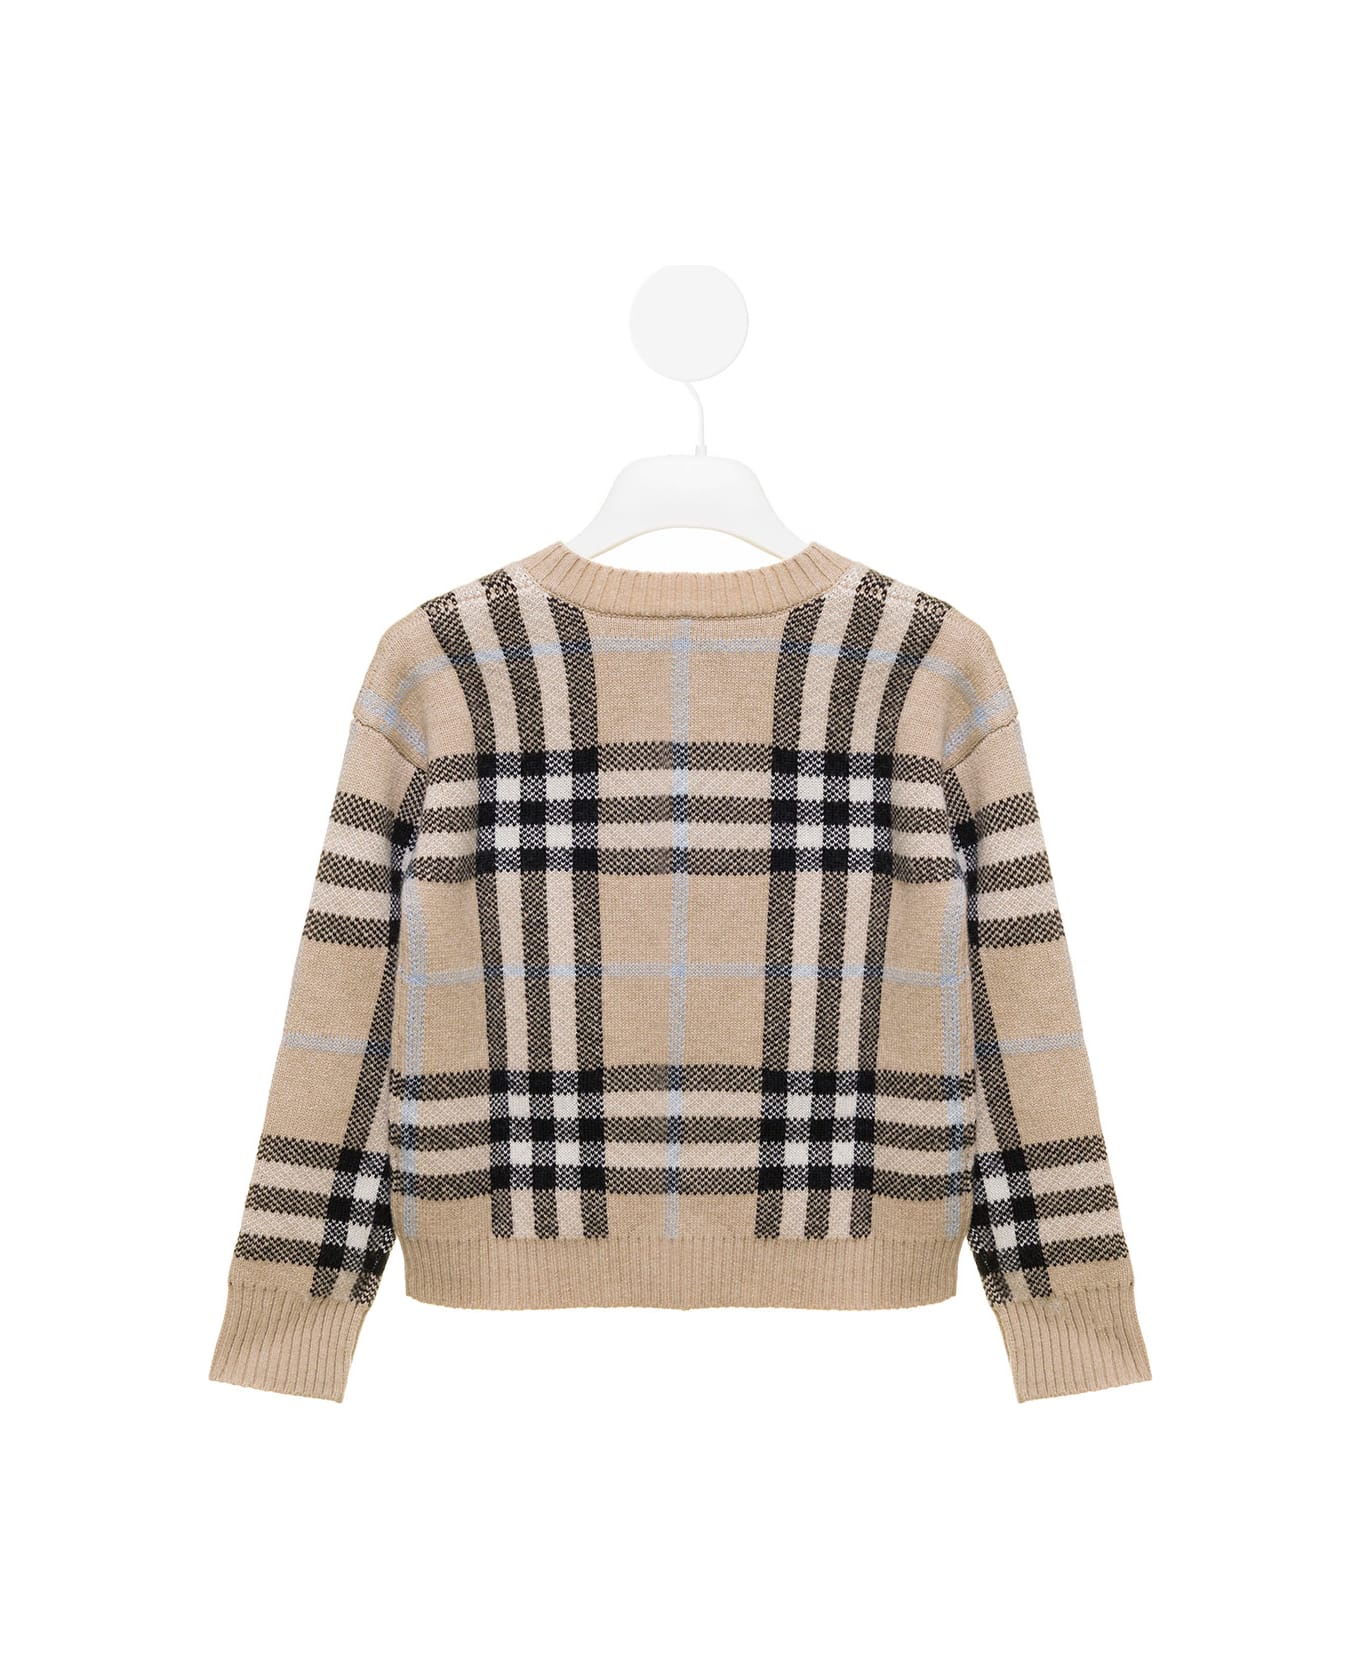 Burberry Beige Wool And Cachemire Cardigan With Vintage Check Motif Girl Burberry Kids - Beige